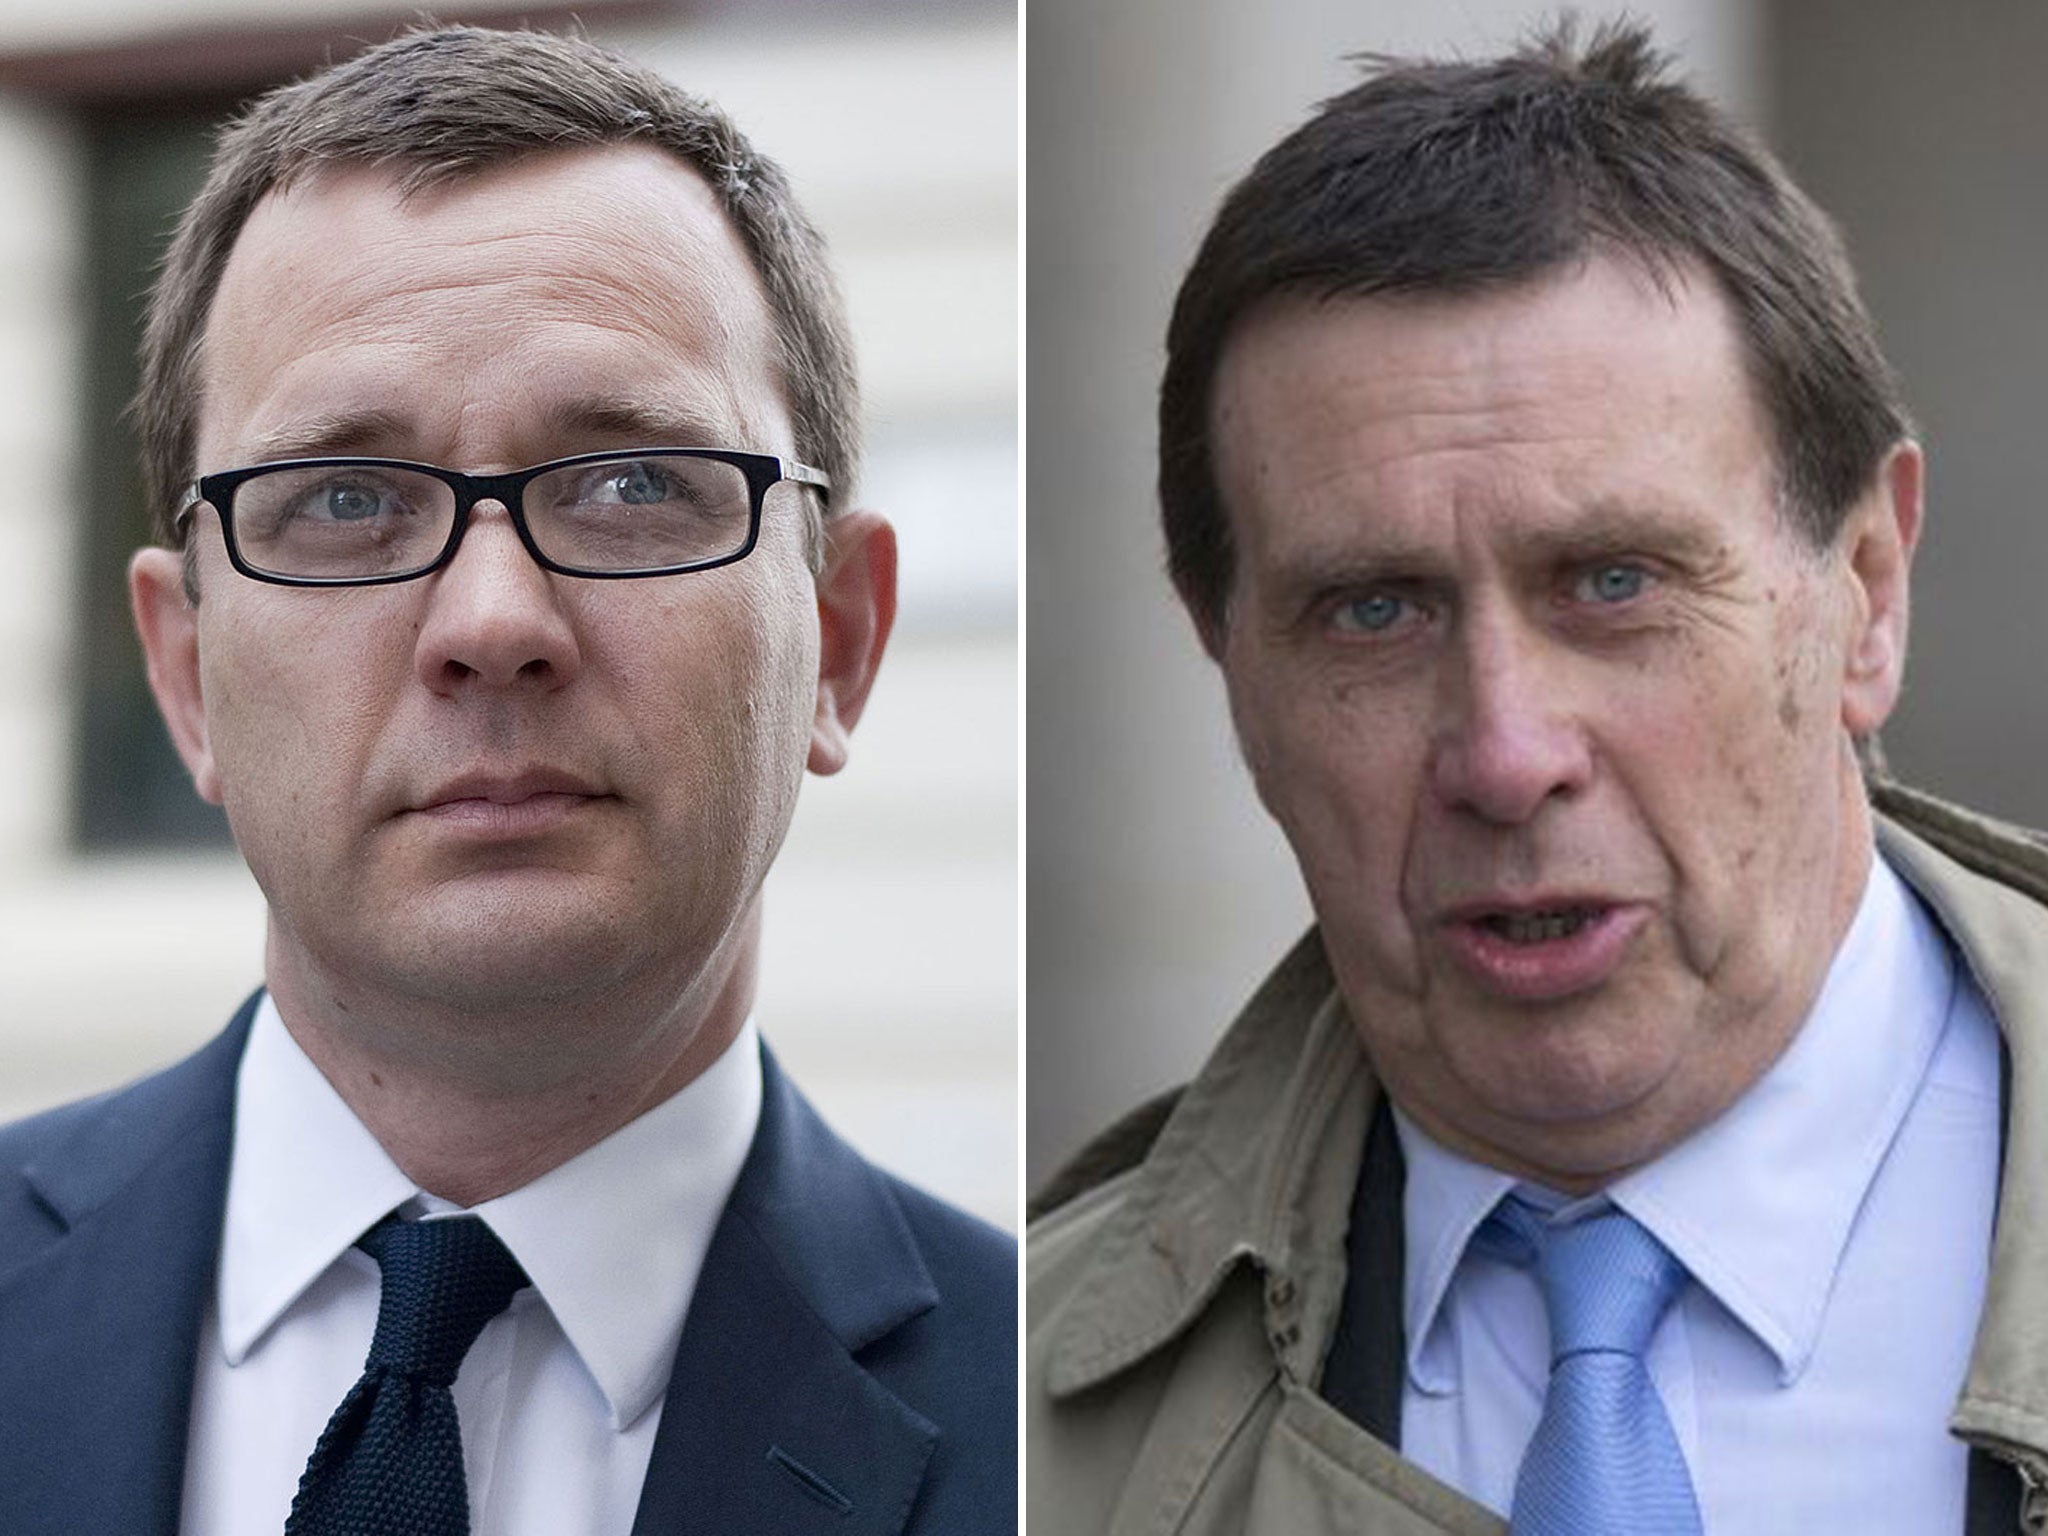 Former News of the World editor Andy Coulson and the paper's former royal editor Clive Goodman, who were told today they will face a retrial over conspiracy to commit misconduct in public office charges